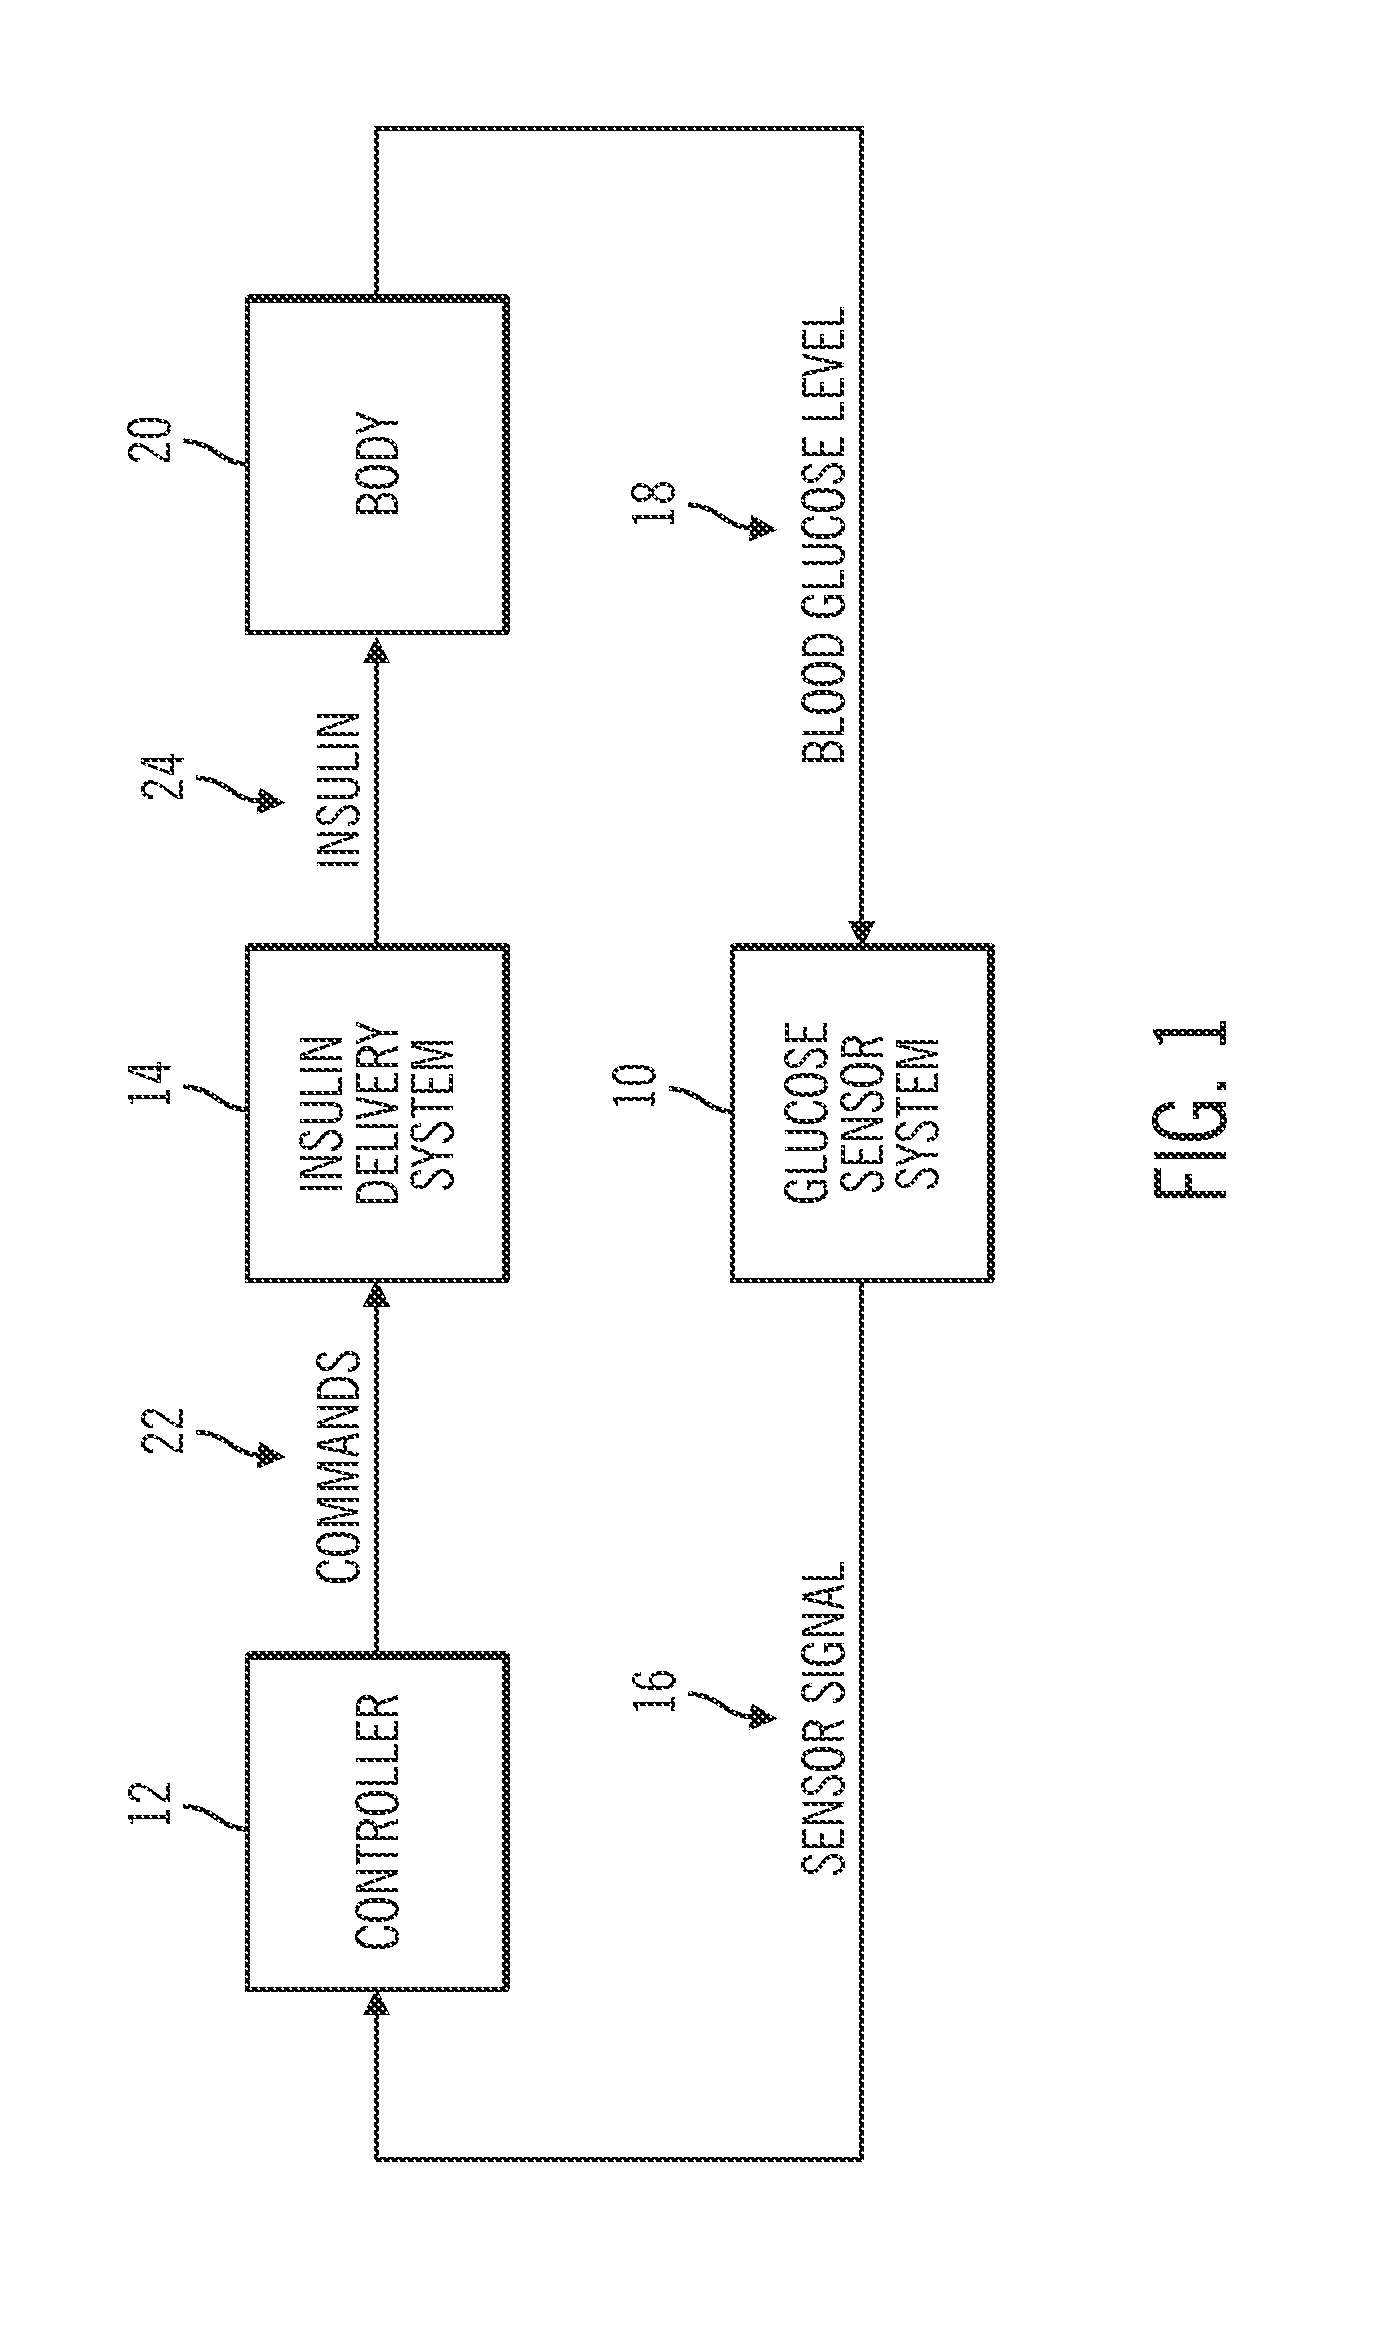 Regulating entry into a closed-loop operating mode of an insulin infusion system